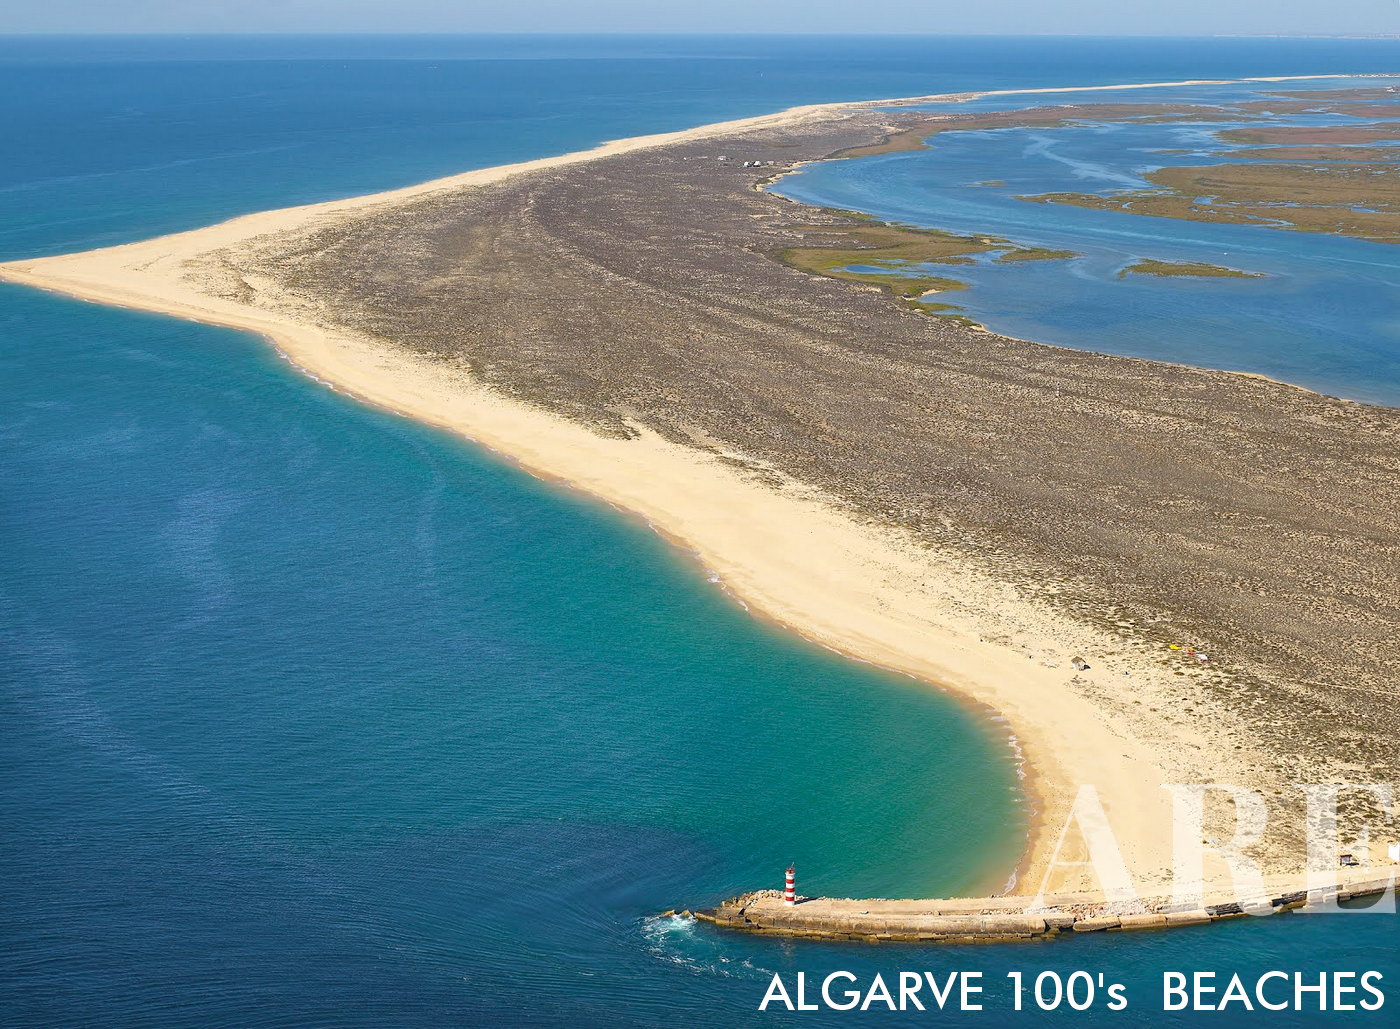 Deserta Island Beach, also known as Ilha Deserta, is a pristine paradise situated in the Ria Formosa Natural Park, near Faro, Portugal. This island is uninhabited, providing visitors with a secluded and unspoiled coastal experience.